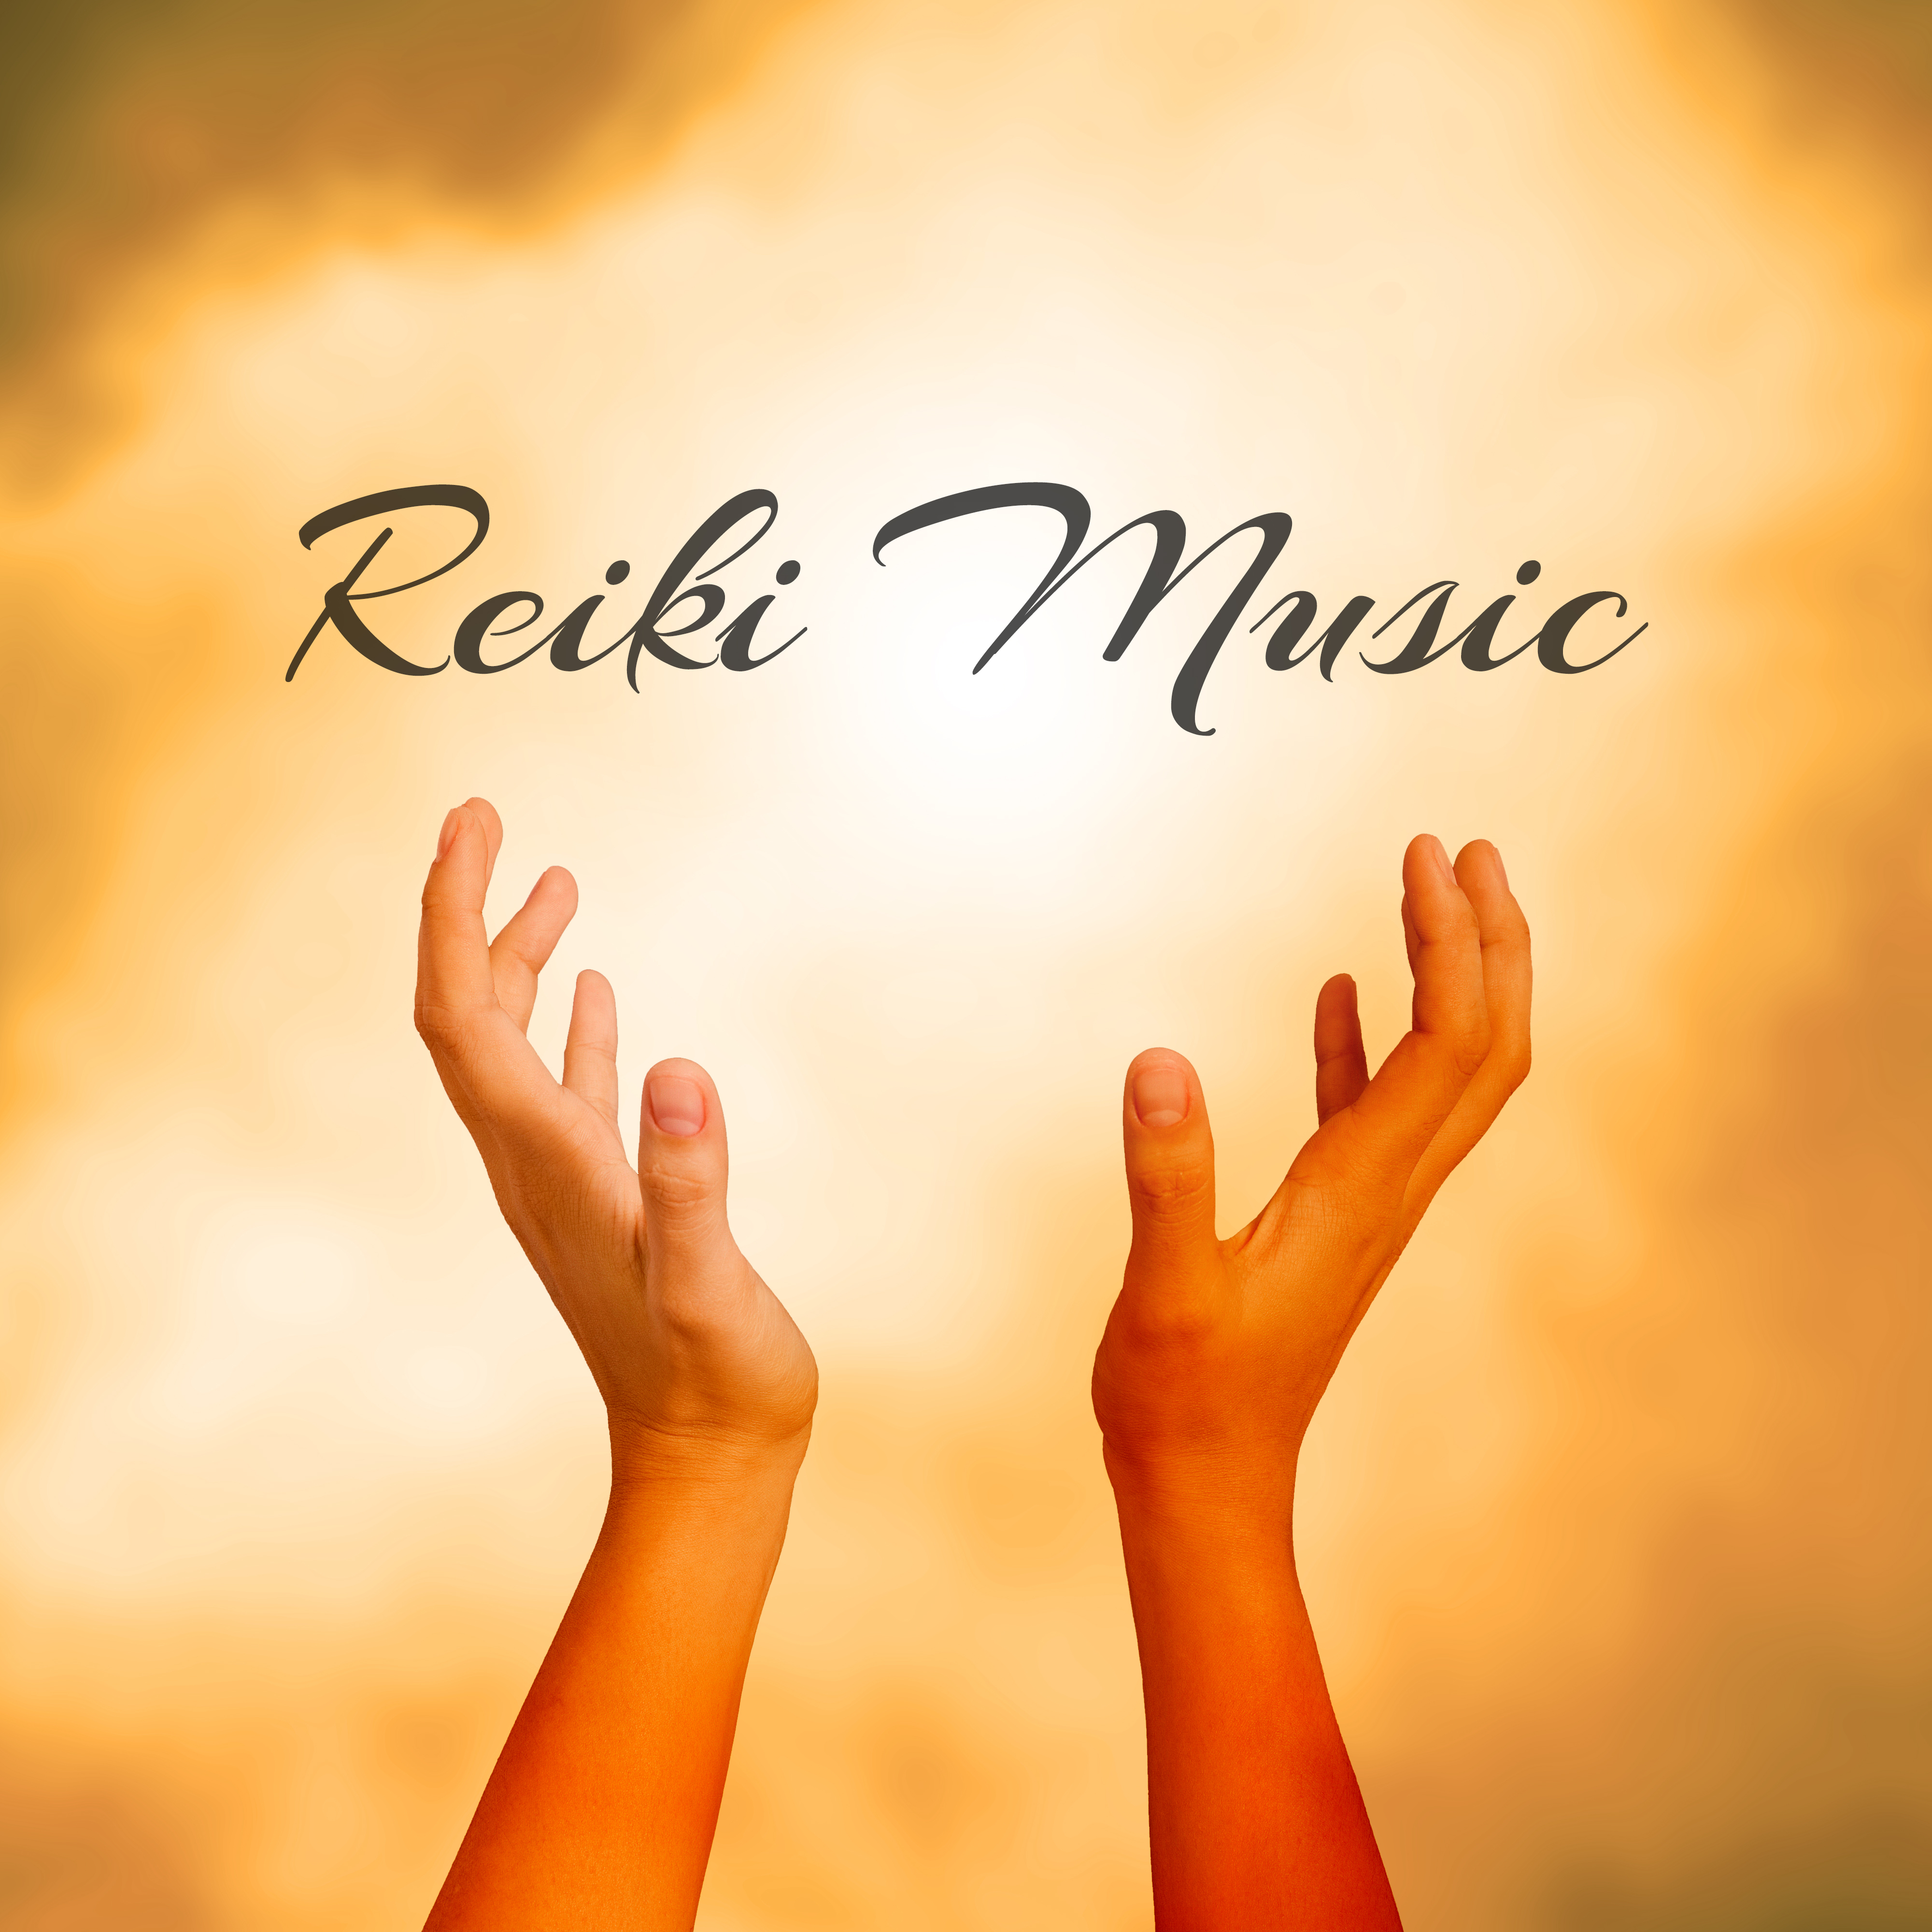 Reiki Music – Sounds of Yoga, Deep Meditation, Focus, Concentration, Pure Mind, Nature Sounds for Relaxation, Harmony